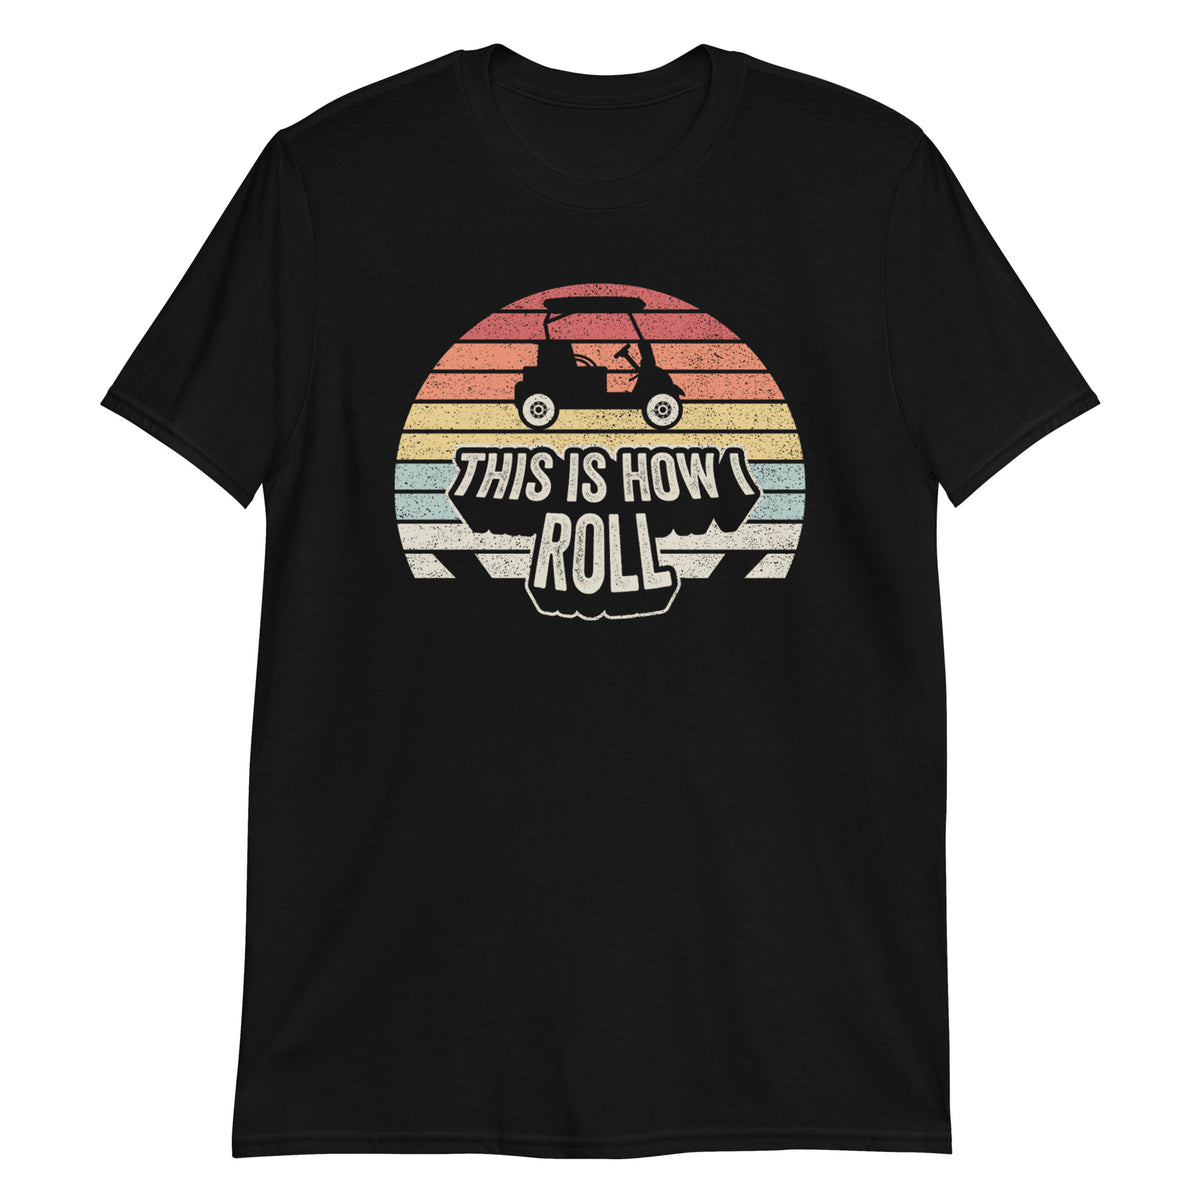 This is How I Roll T-Shirt